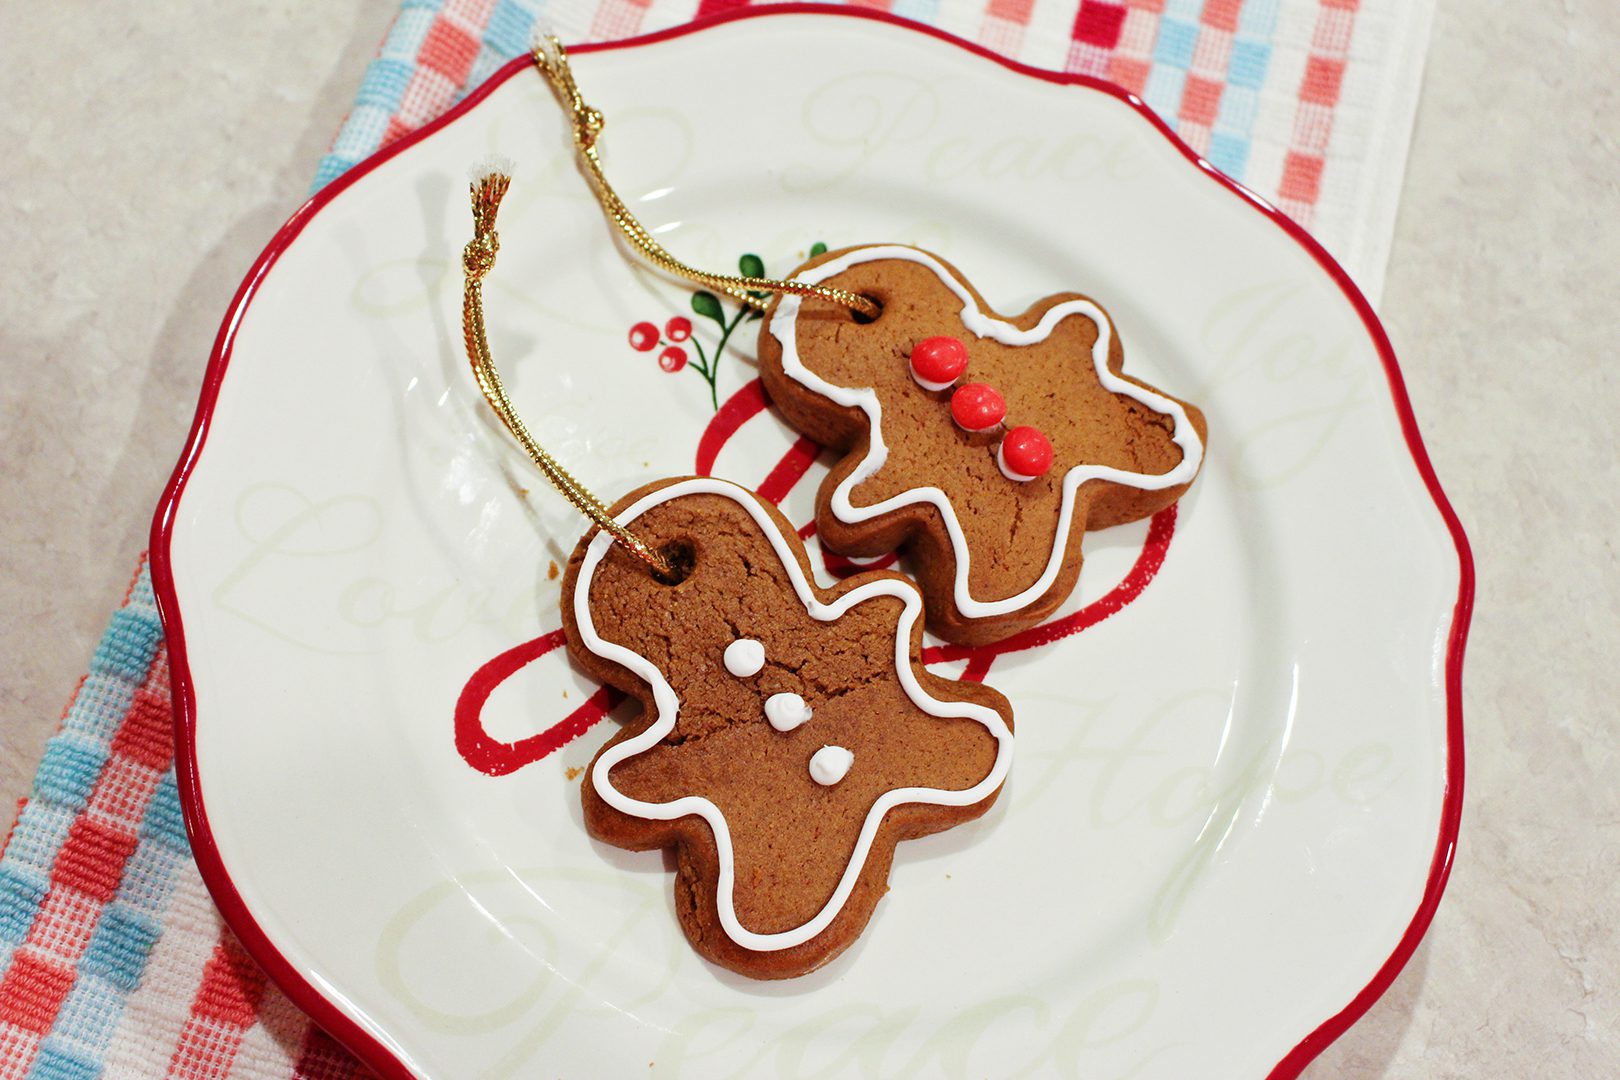 Two gingerbread men cookies decorated with white icing and red hot candies sitting on a Christmas plate.